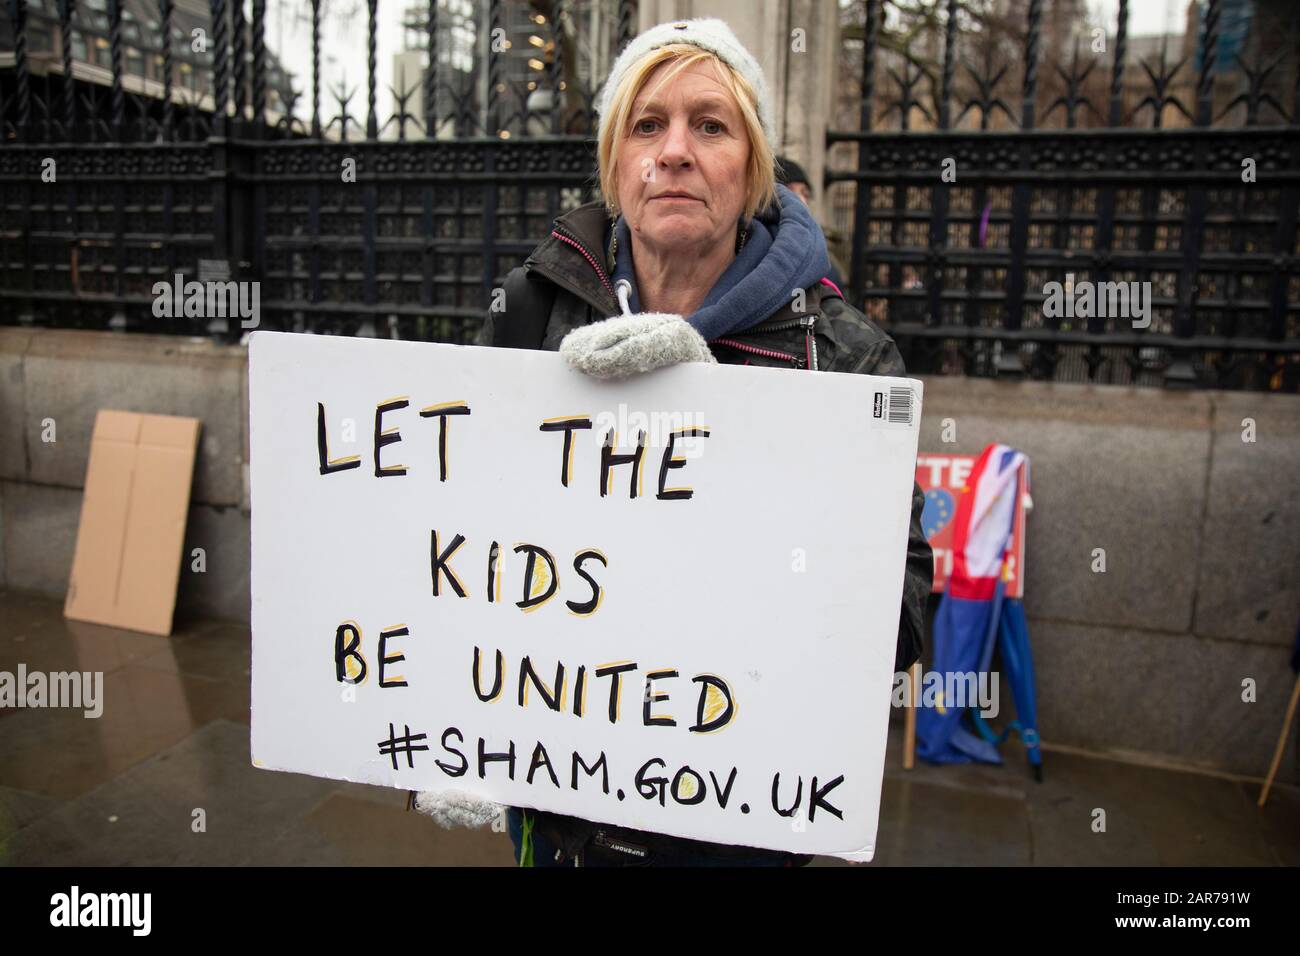 Anti Brexit protester with a placard reading let the kids be united. #sham.gov.uk alluding to a sham government in Westminster outside Parliament on 22nd January 2020 in London, England, United Kingdom. With a majority Conservative government in power and Brexit day at the end of January looming, the role of these protesters is now to demonstrate in the hope of the softest Brexit deal possible. Stock Photo